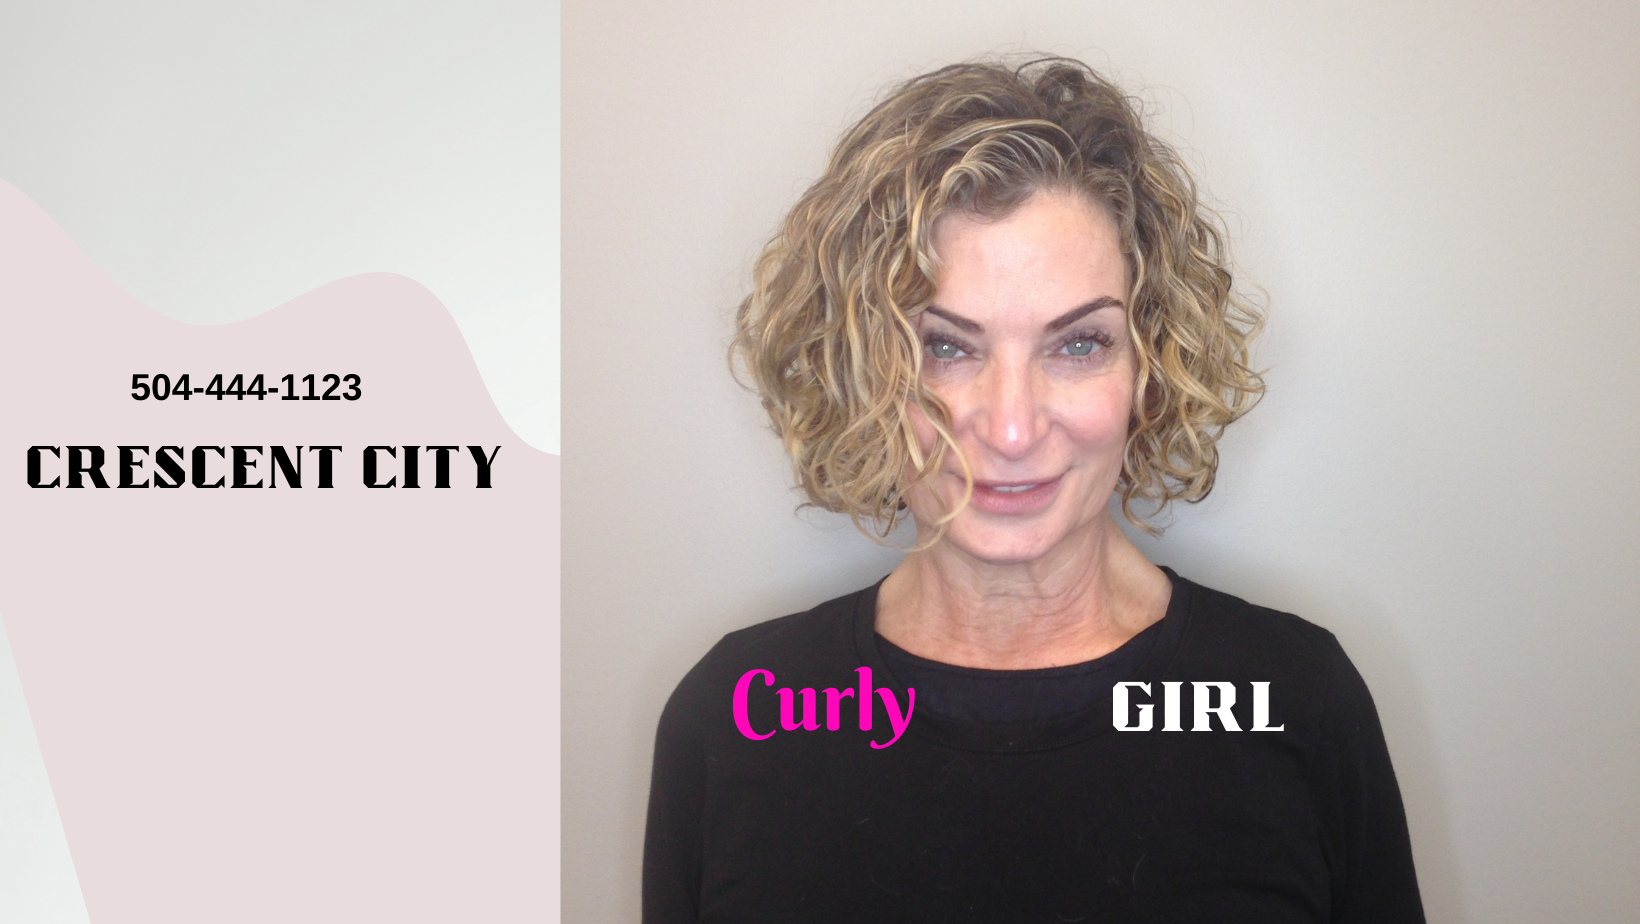 Hairwear / Home of the Crescent City Curly Girl